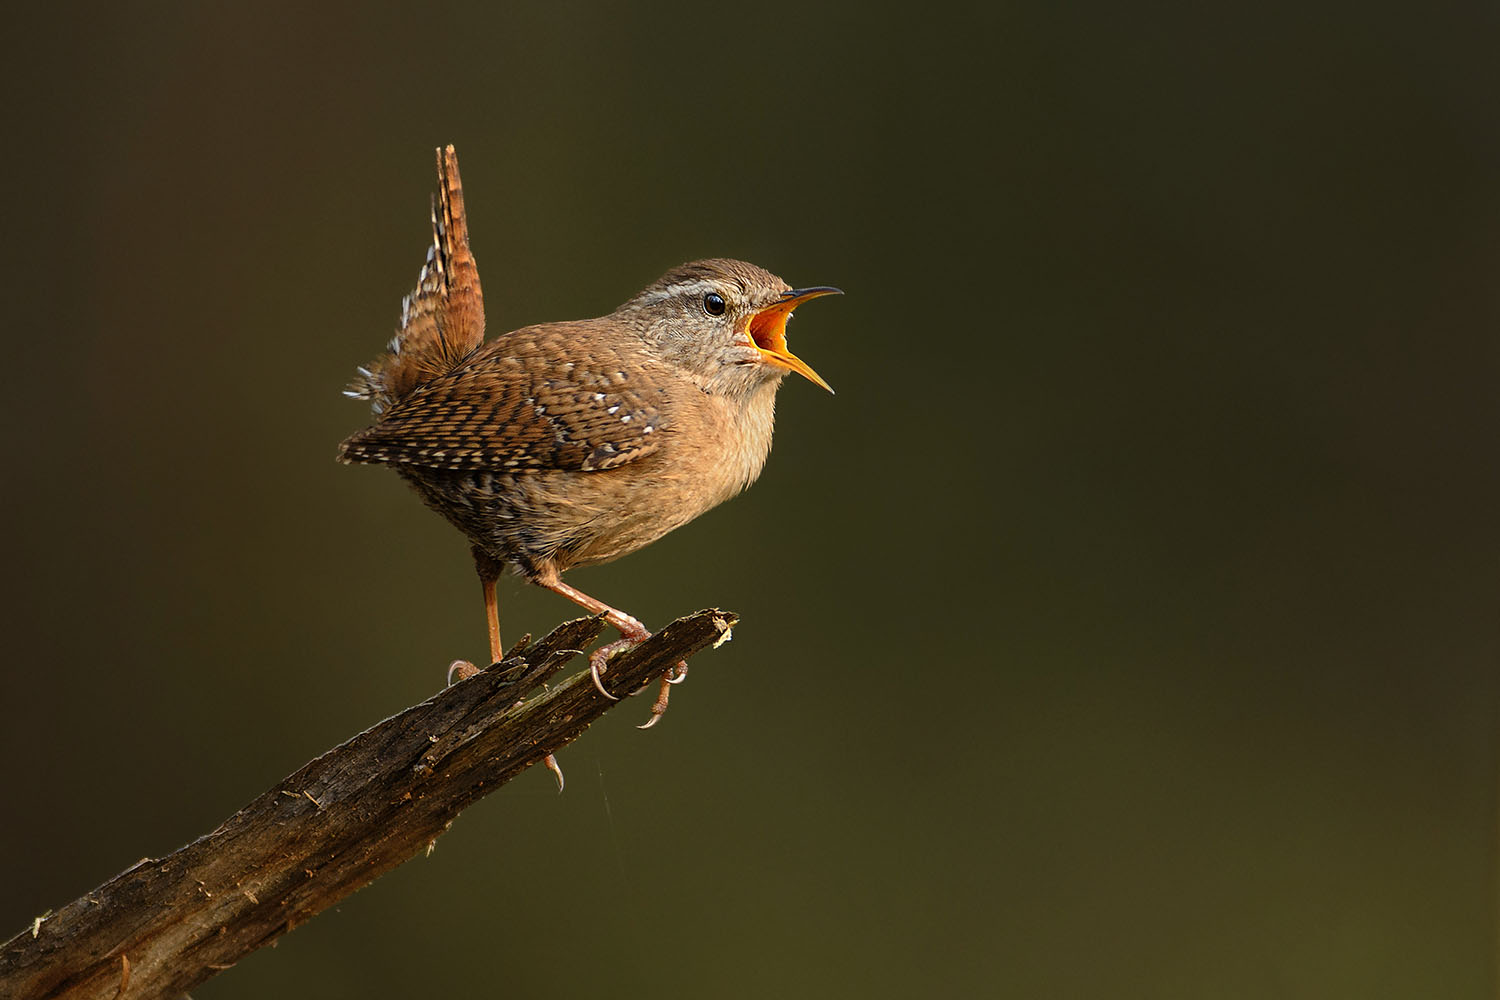 Wren chirping on a tree branch